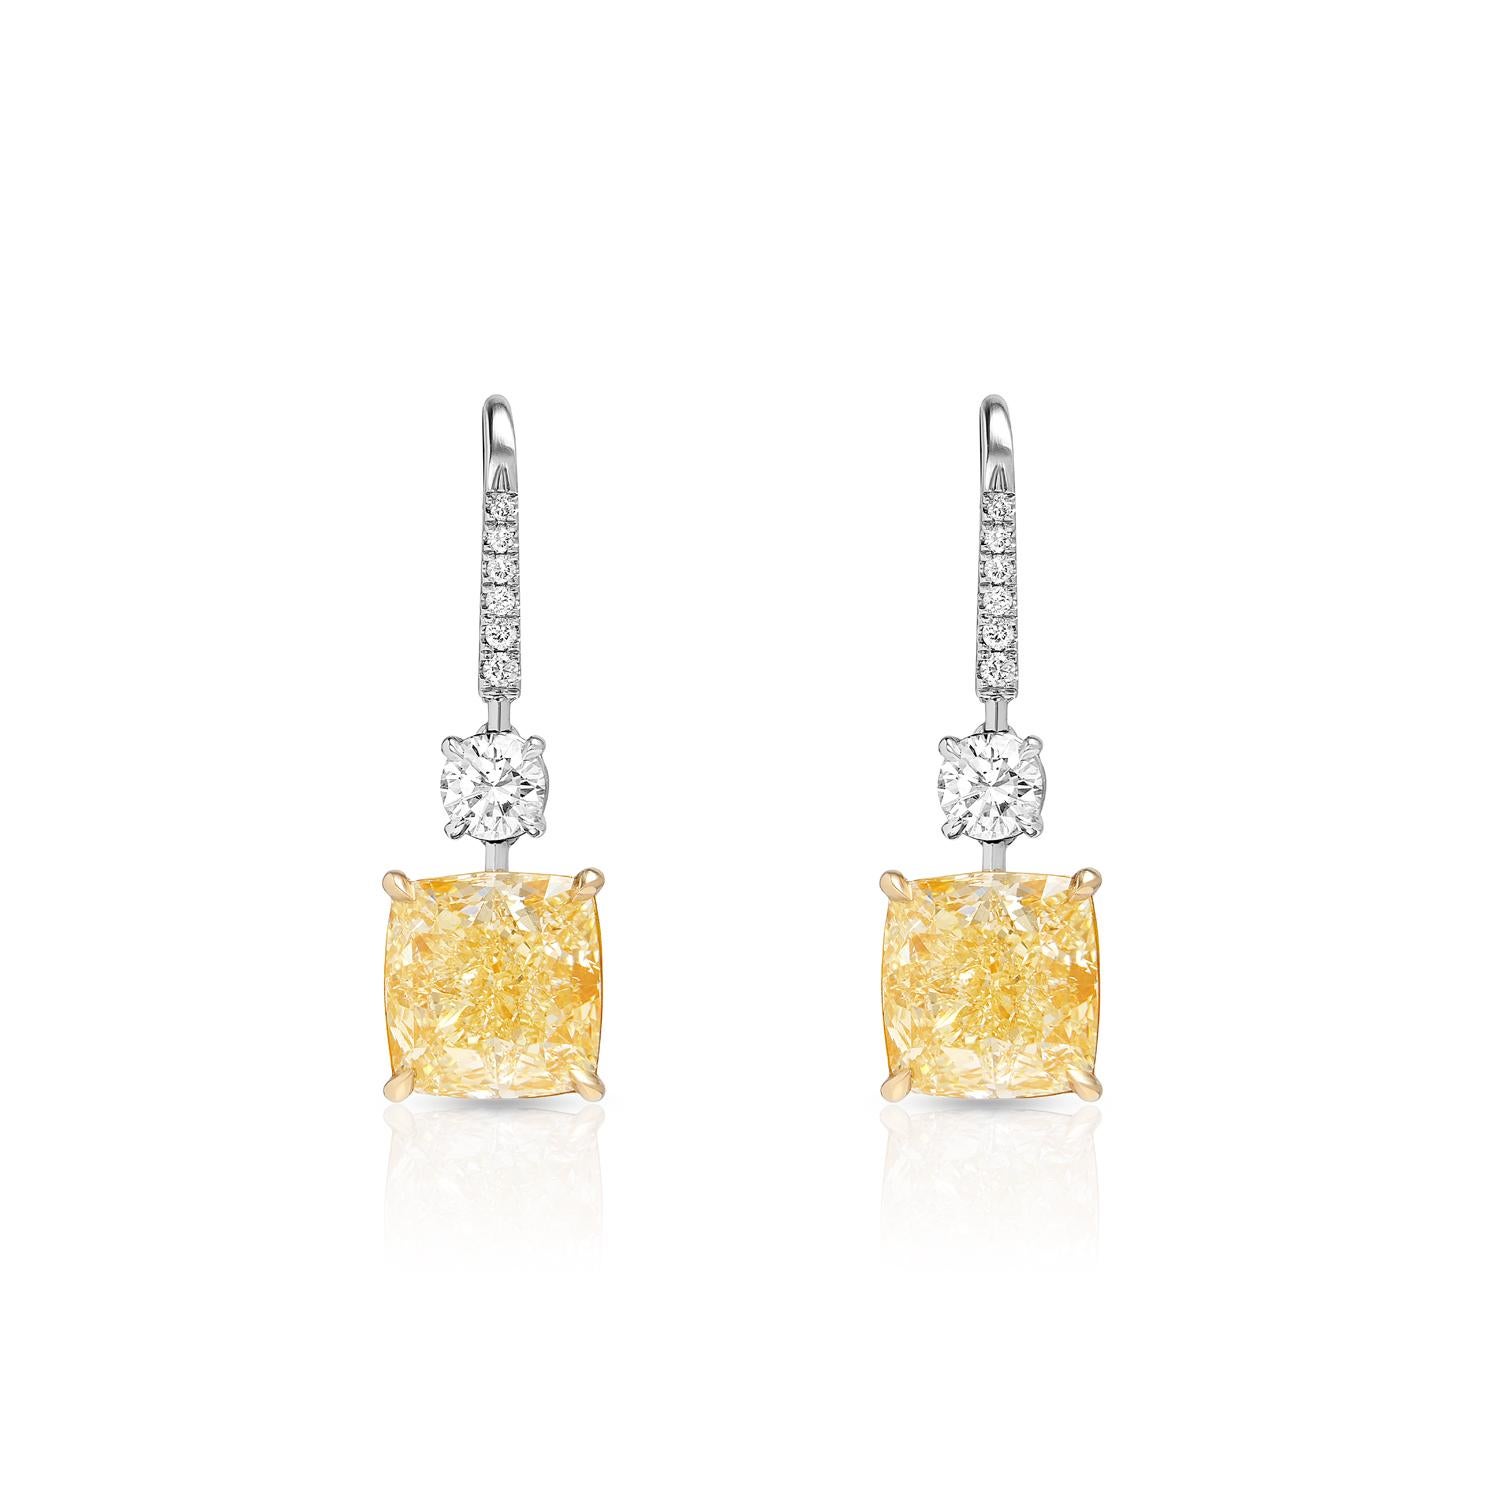 These exquisite earrings feature 10.03 carats of VVS-clarity, YZ-colored diamonds, and each is expertly cut into a gorgeous cushion shape. And at just 0.84 carats in weight, these earrings are the perfect size for any occasion. Crafted from platinum